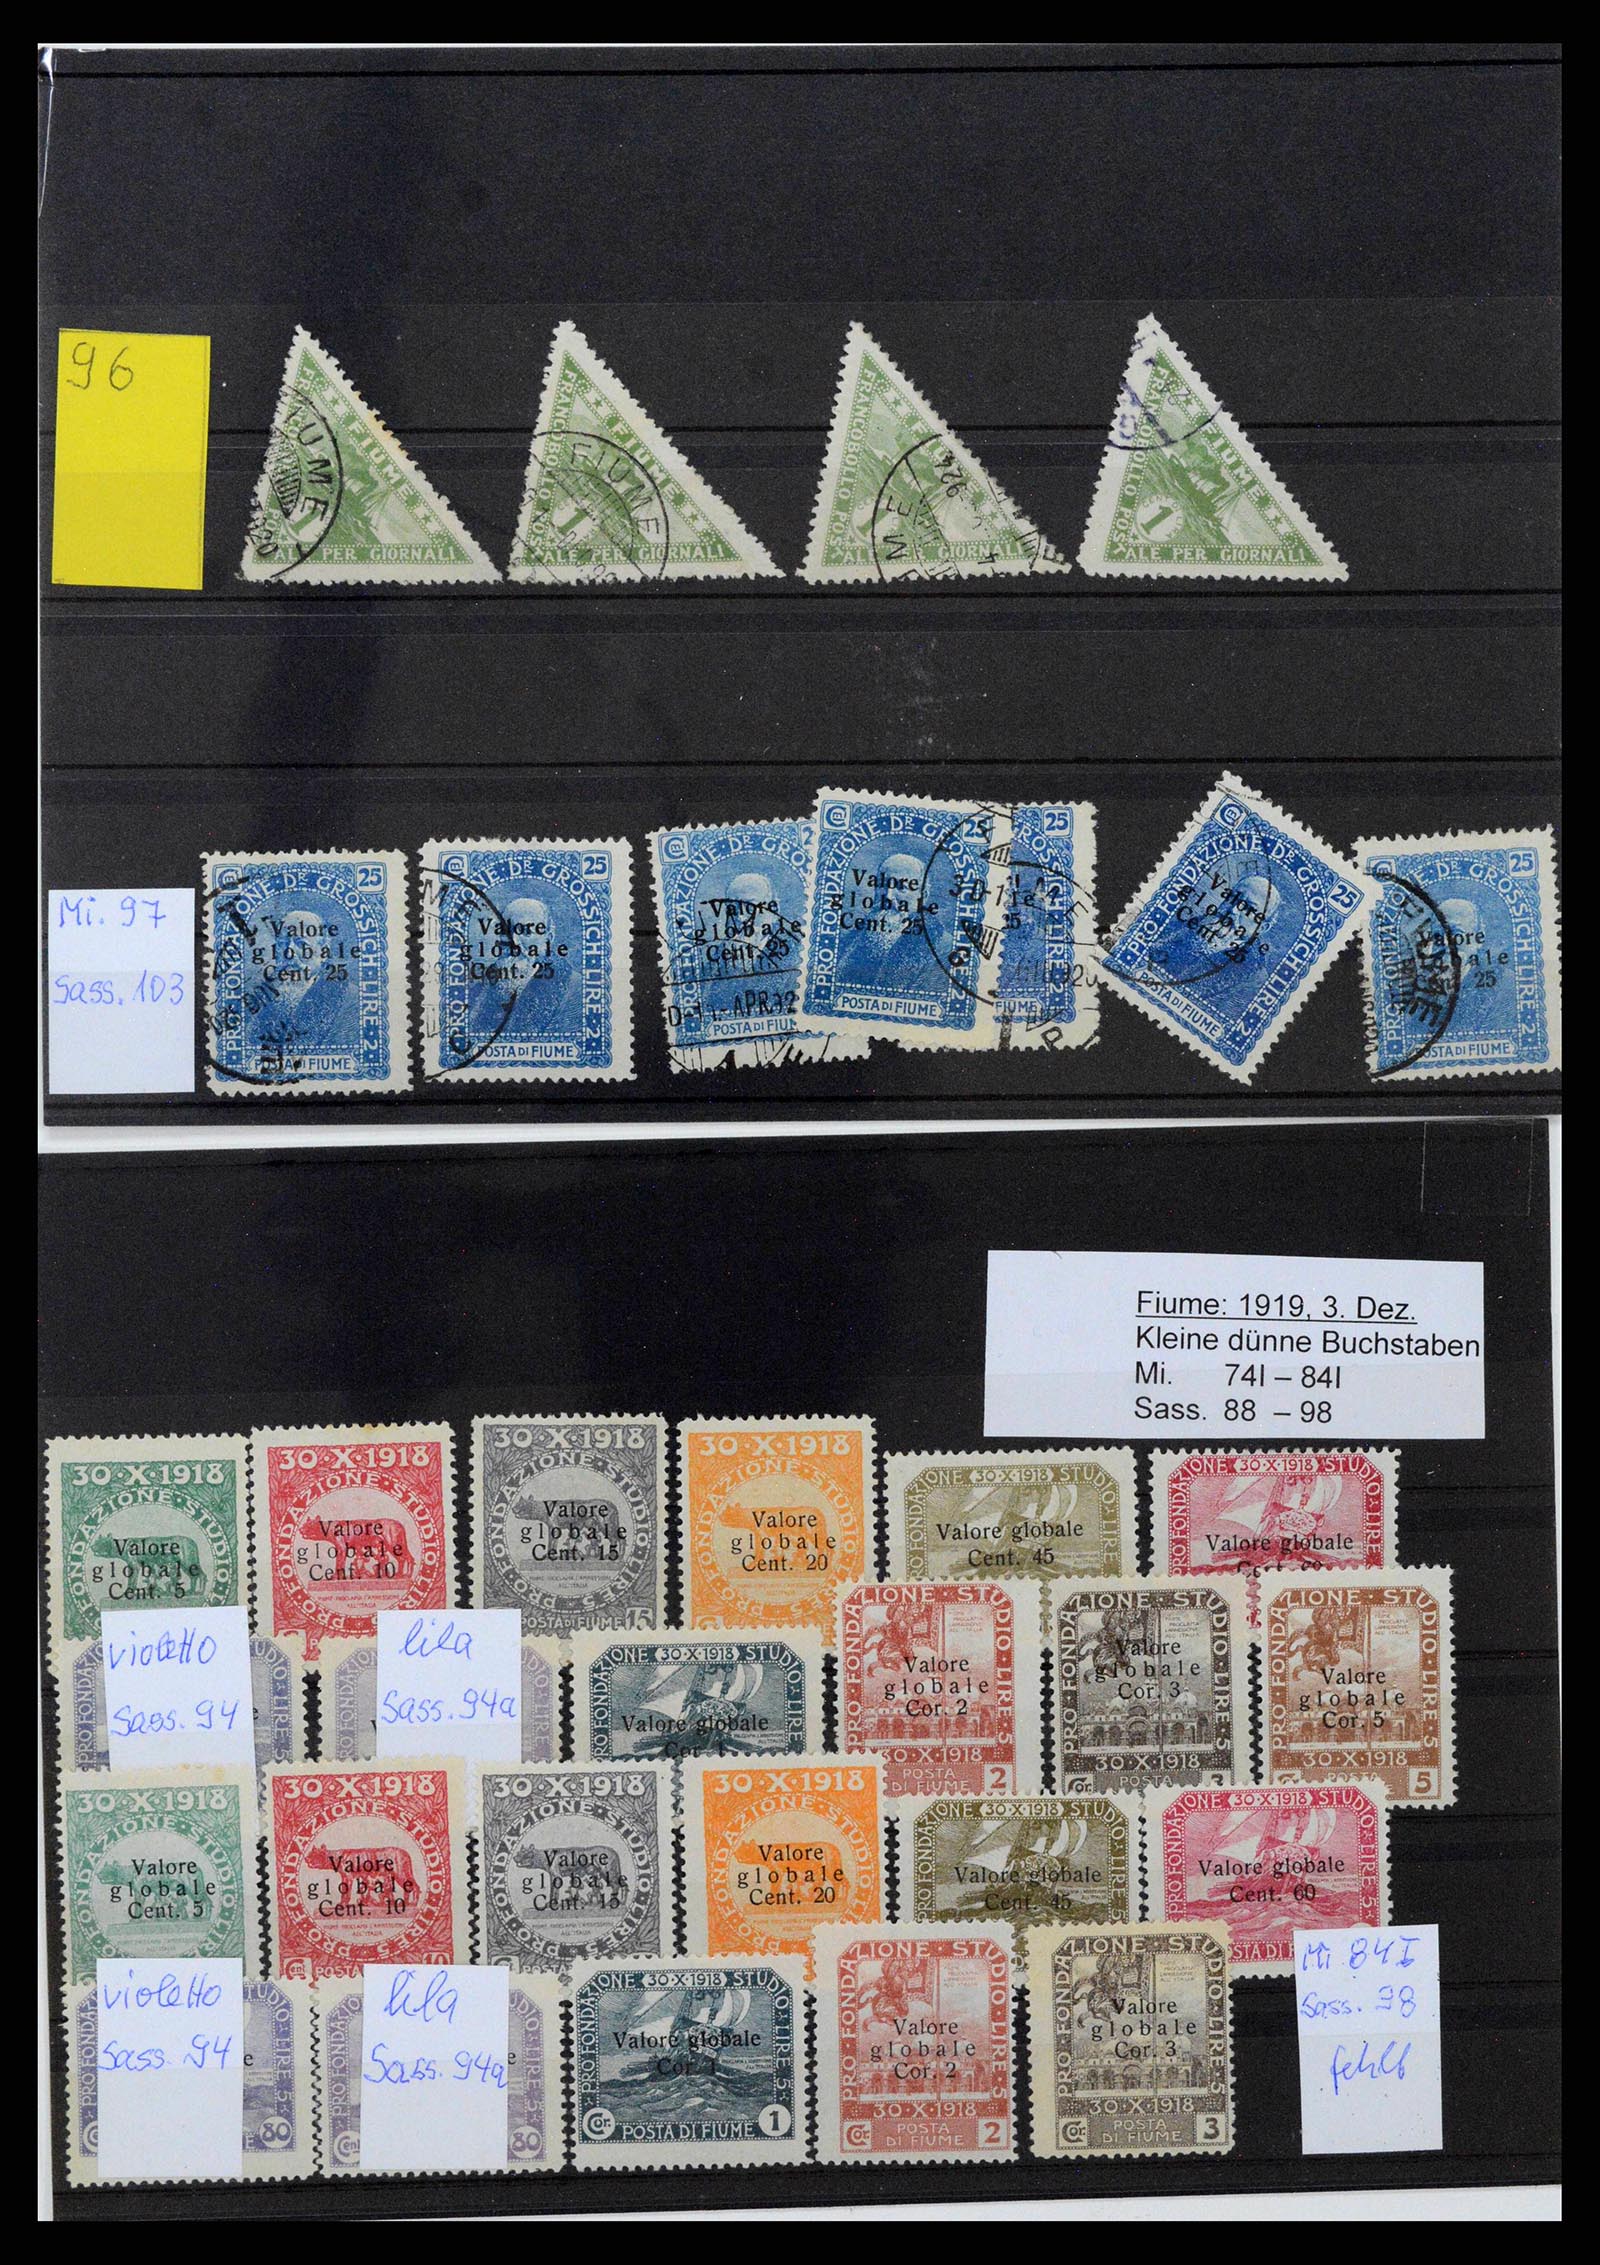 38507 0045 - Stamp collection 38507 Fiume 1920-1924.